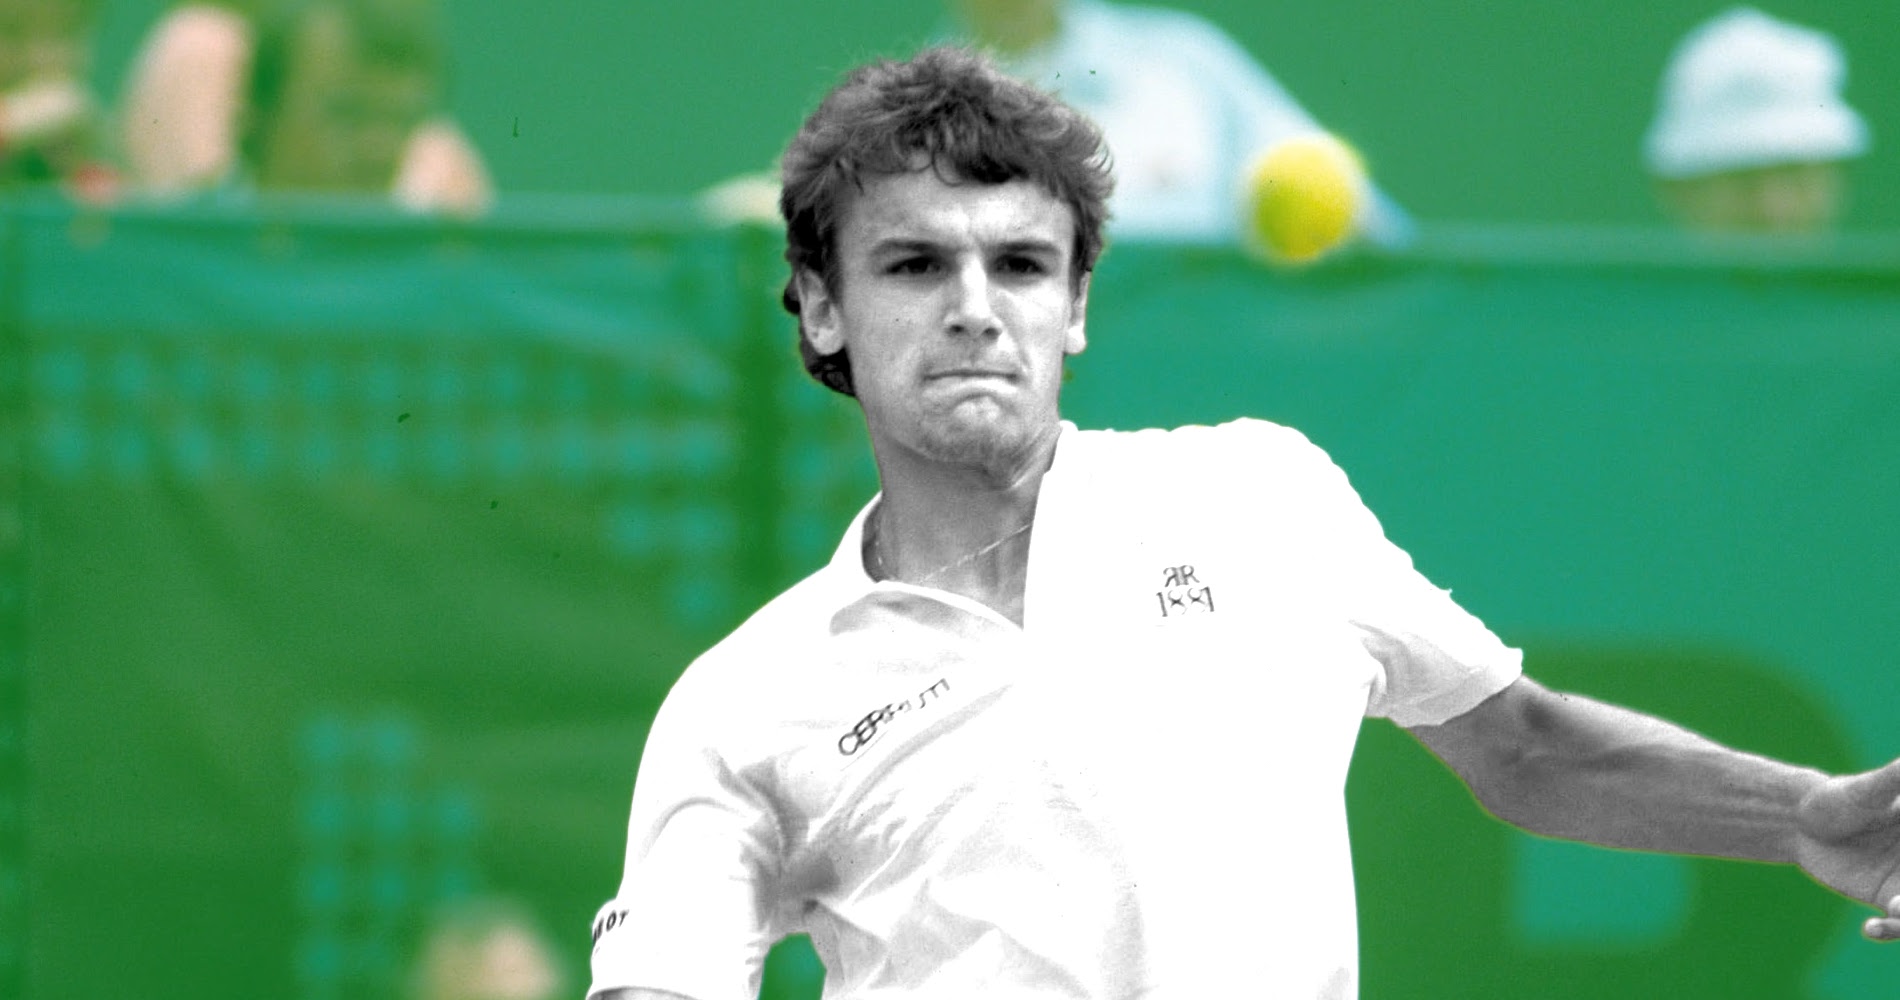 Mats Wilander On this day 11.12.2020